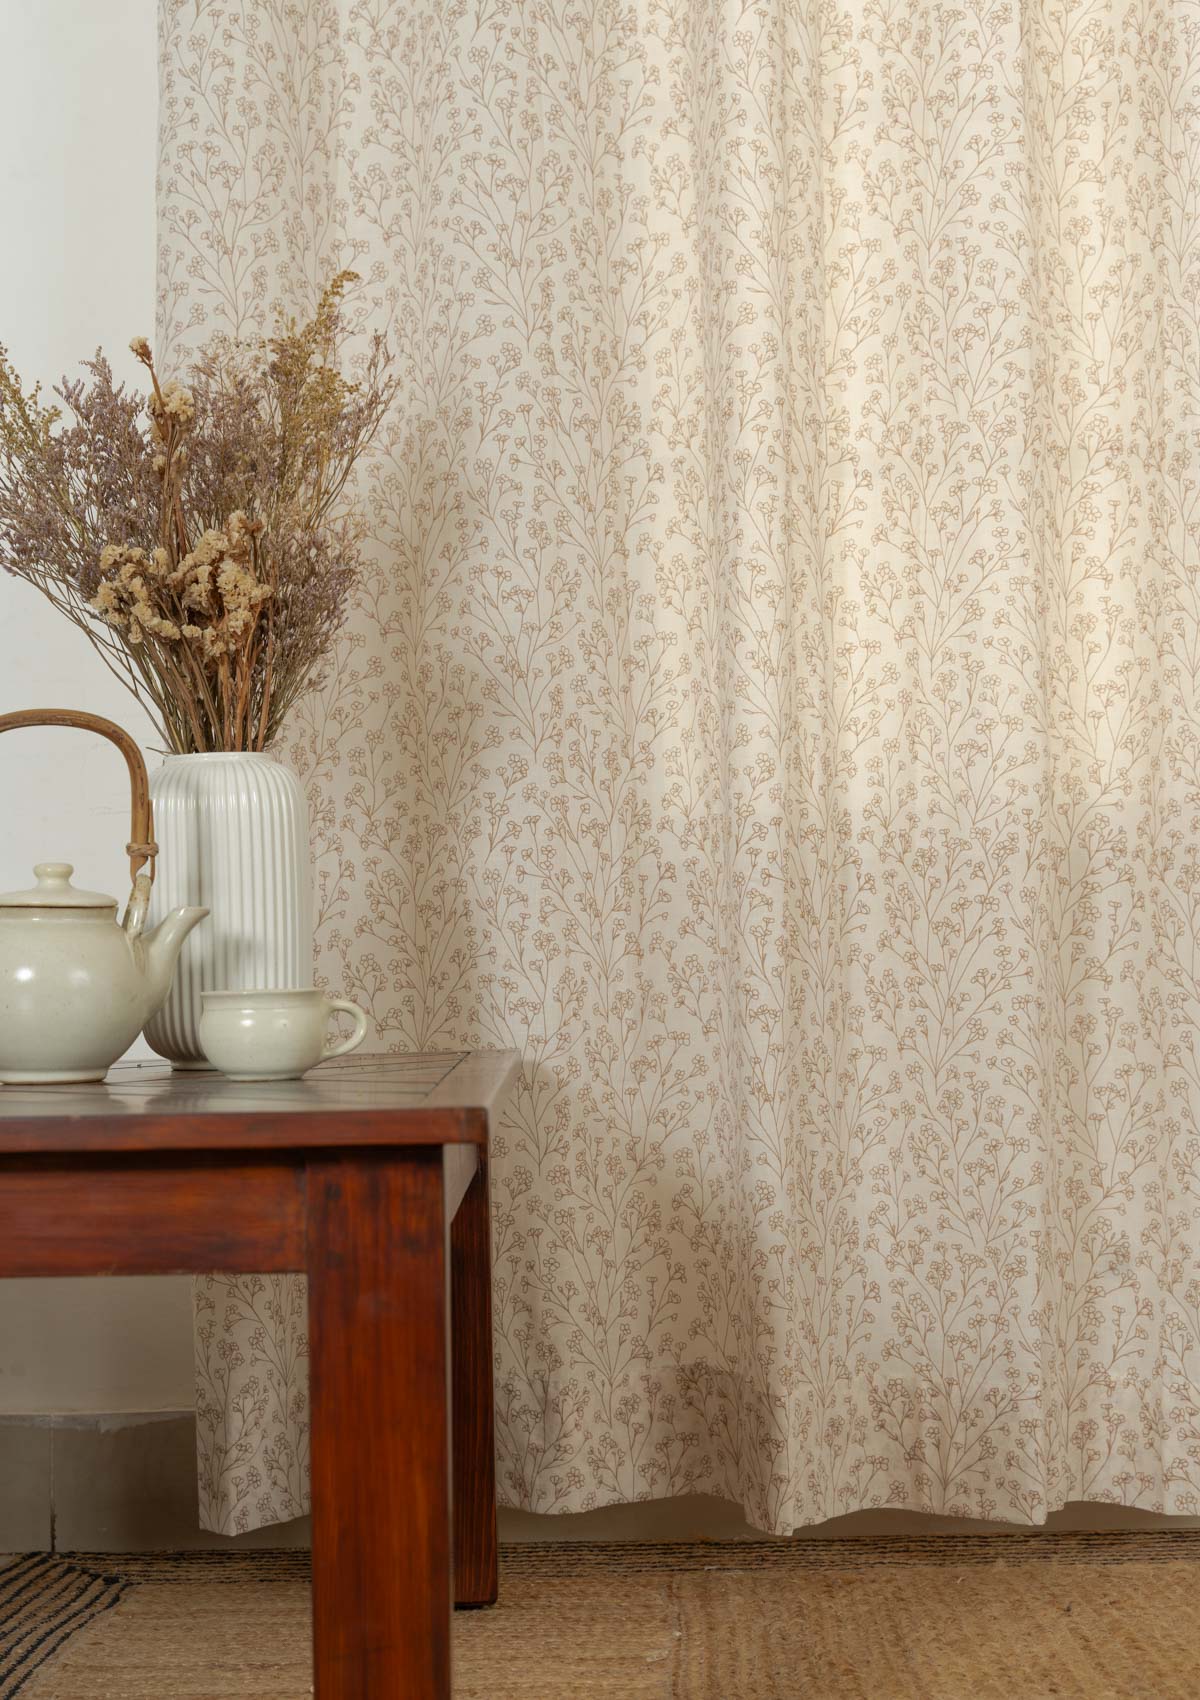 Canopy 100% cotton floral sheer curtain for living room - Light filtering - Brown - Single - Pack of 1